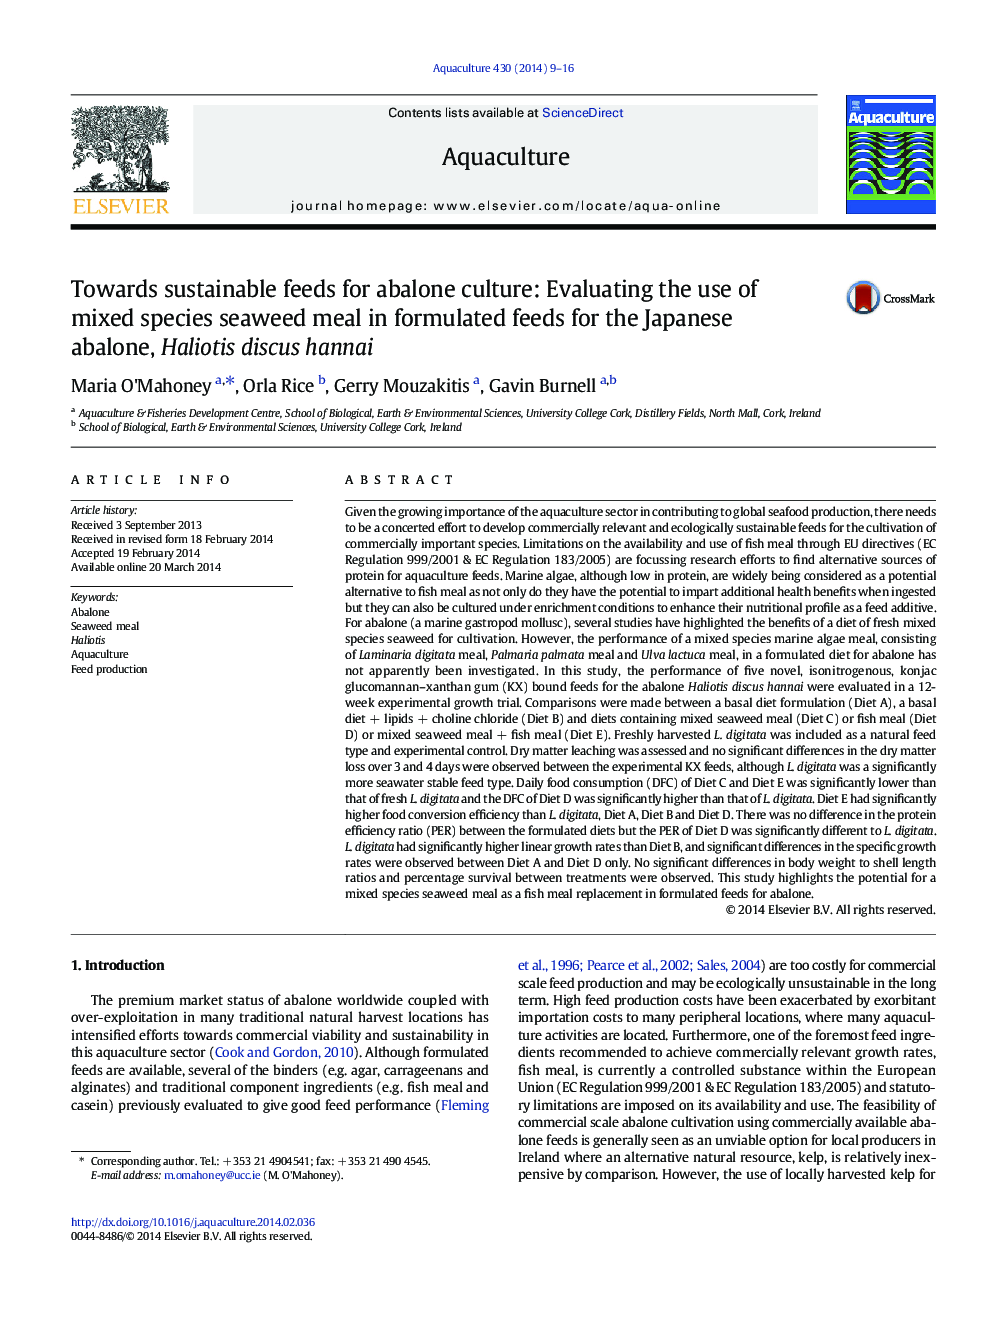 Towards sustainable feeds for abalone culture: Evaluating the use of mixed species seaweed meal in formulated feeds for the Japanese abalone, Haliotis discus hannai